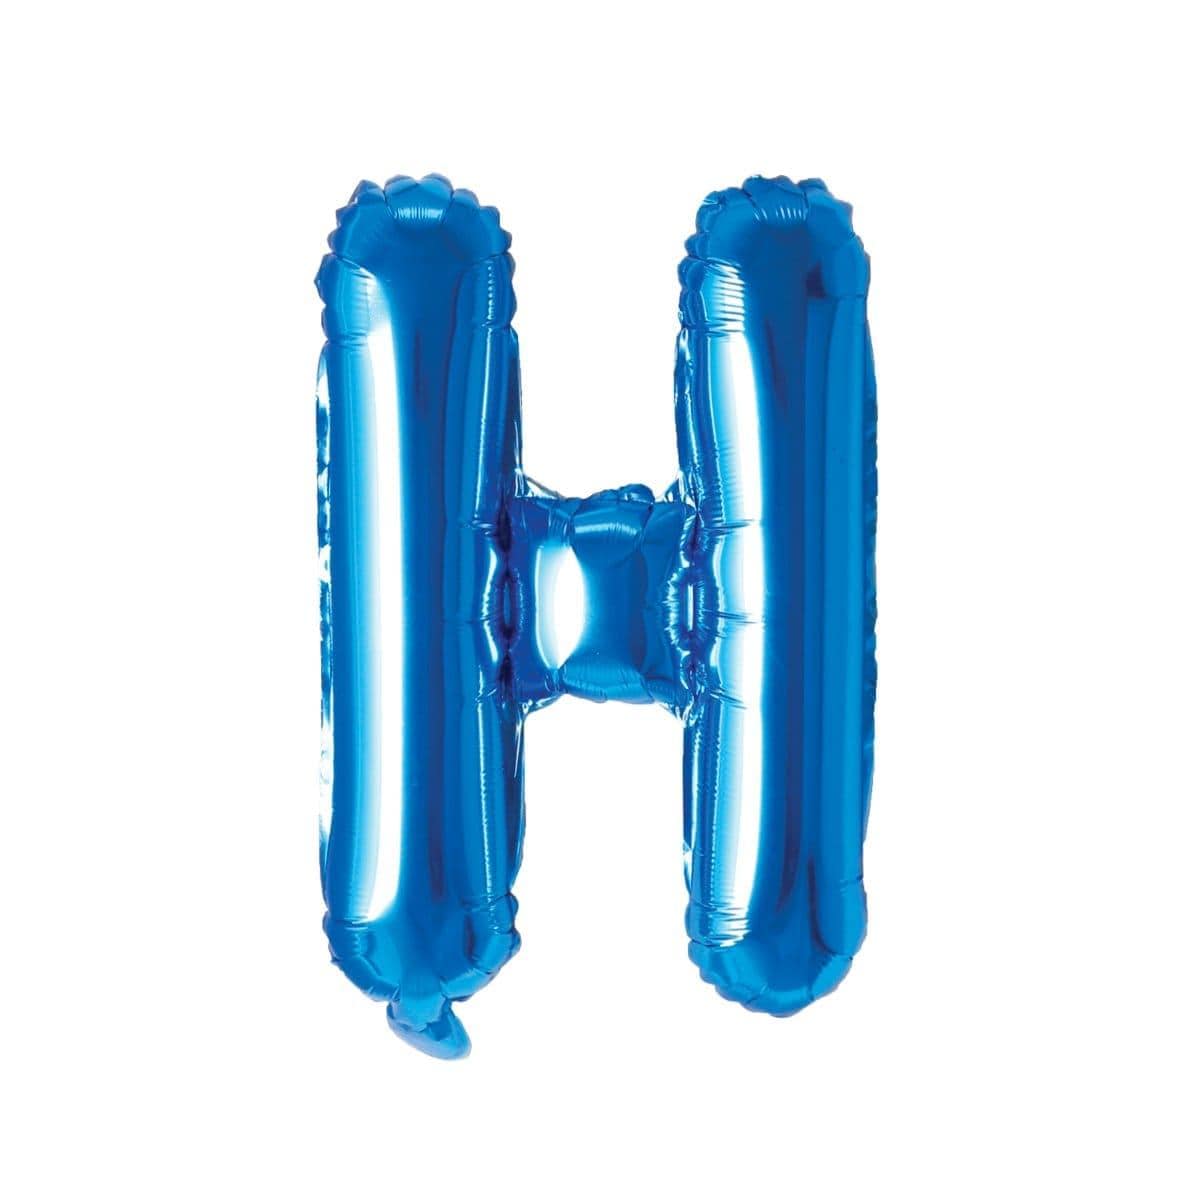 Buy Balloons Blue Letter H Foil Balloon, 16 Inches sold at Party Expert